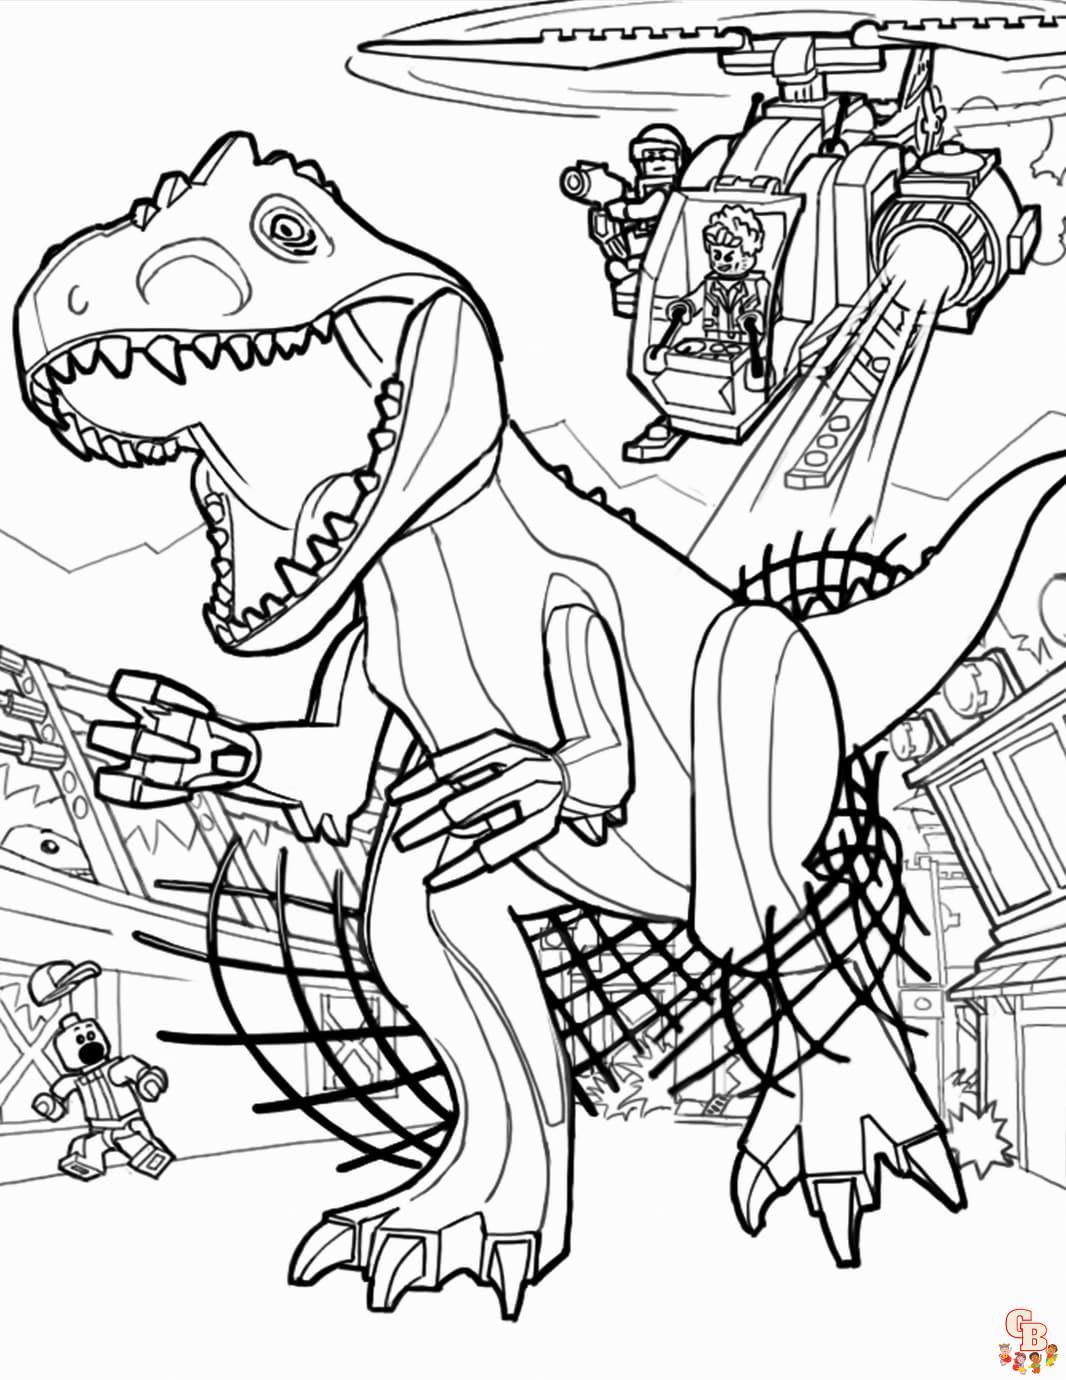 simple airplane coloring pages